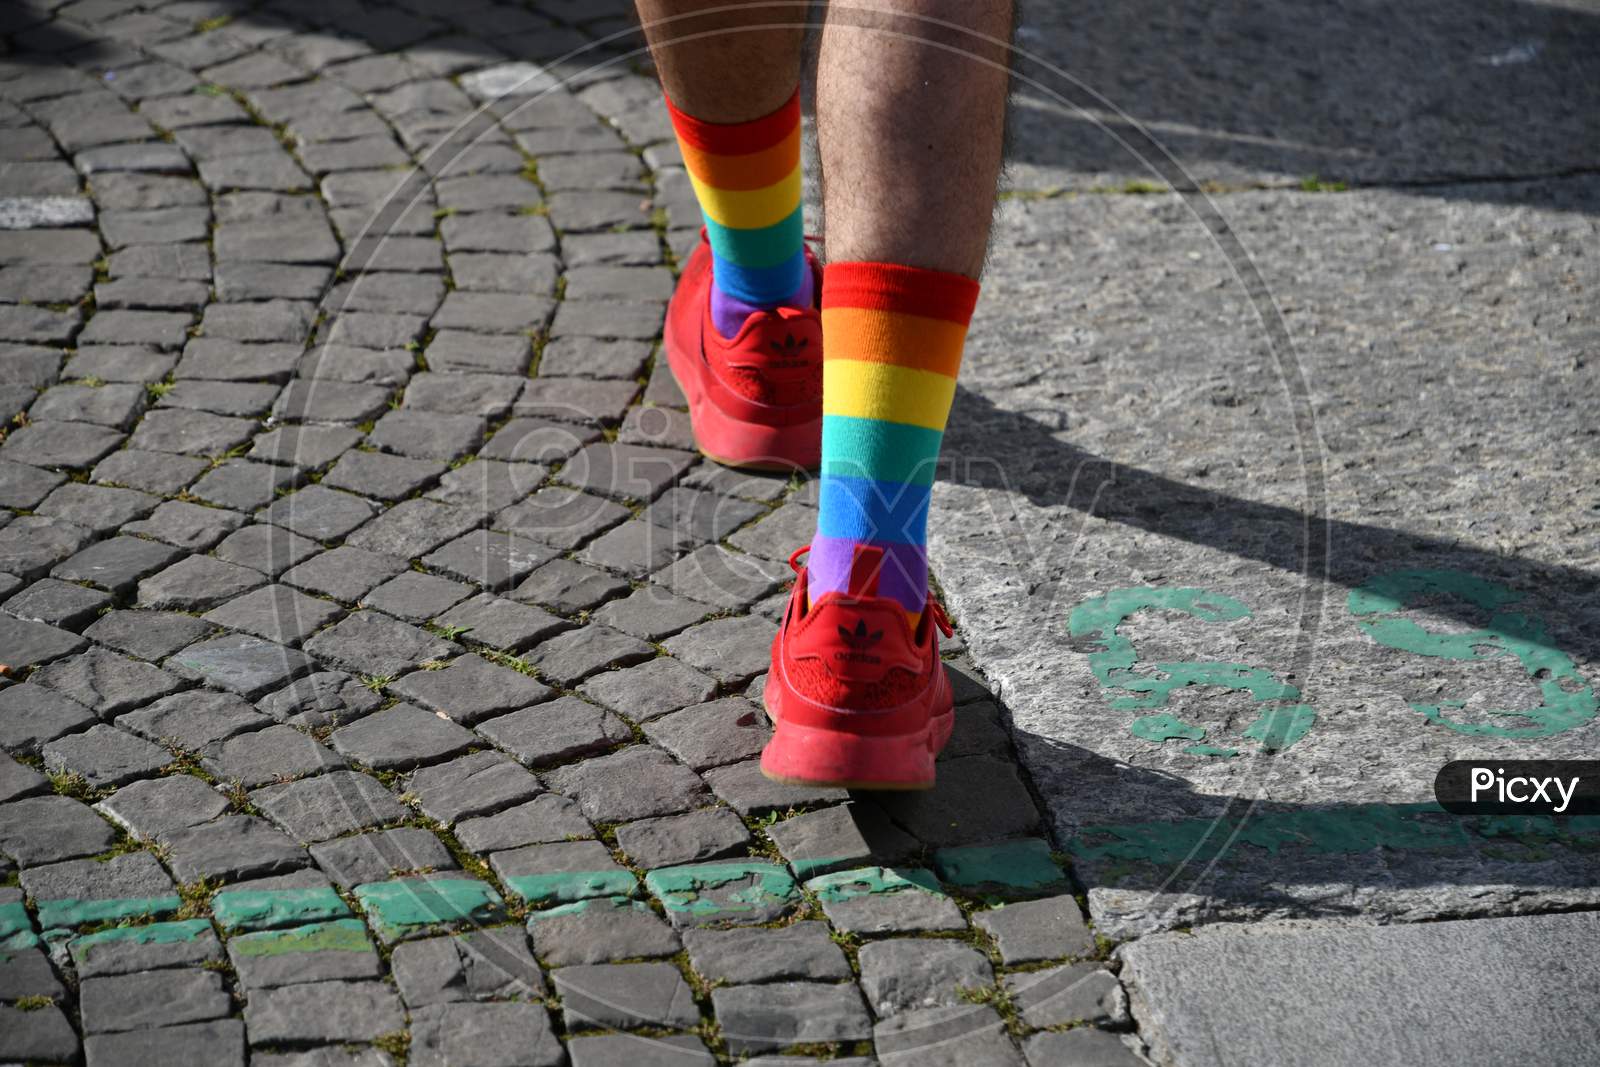 Zurich, Switzerland, September 4, 2021 Rainbow Colored Socks At A Demonstration In The City Center